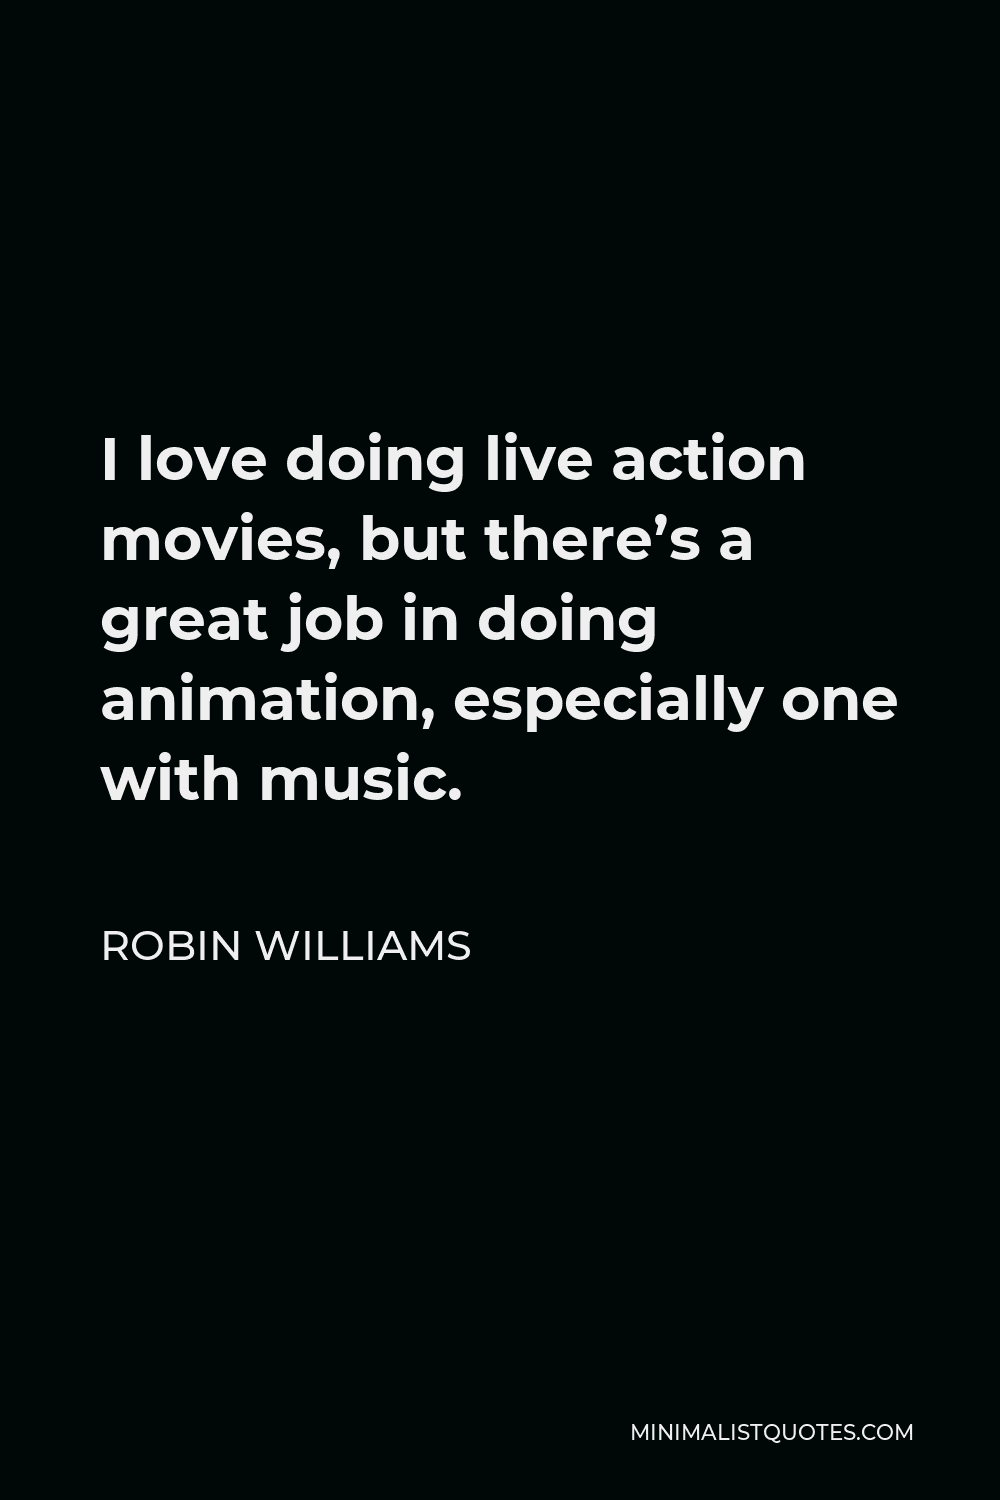 Robin Williams Quote - I love doing live action movies, but there’s a great job in doing animation, especially one with music.